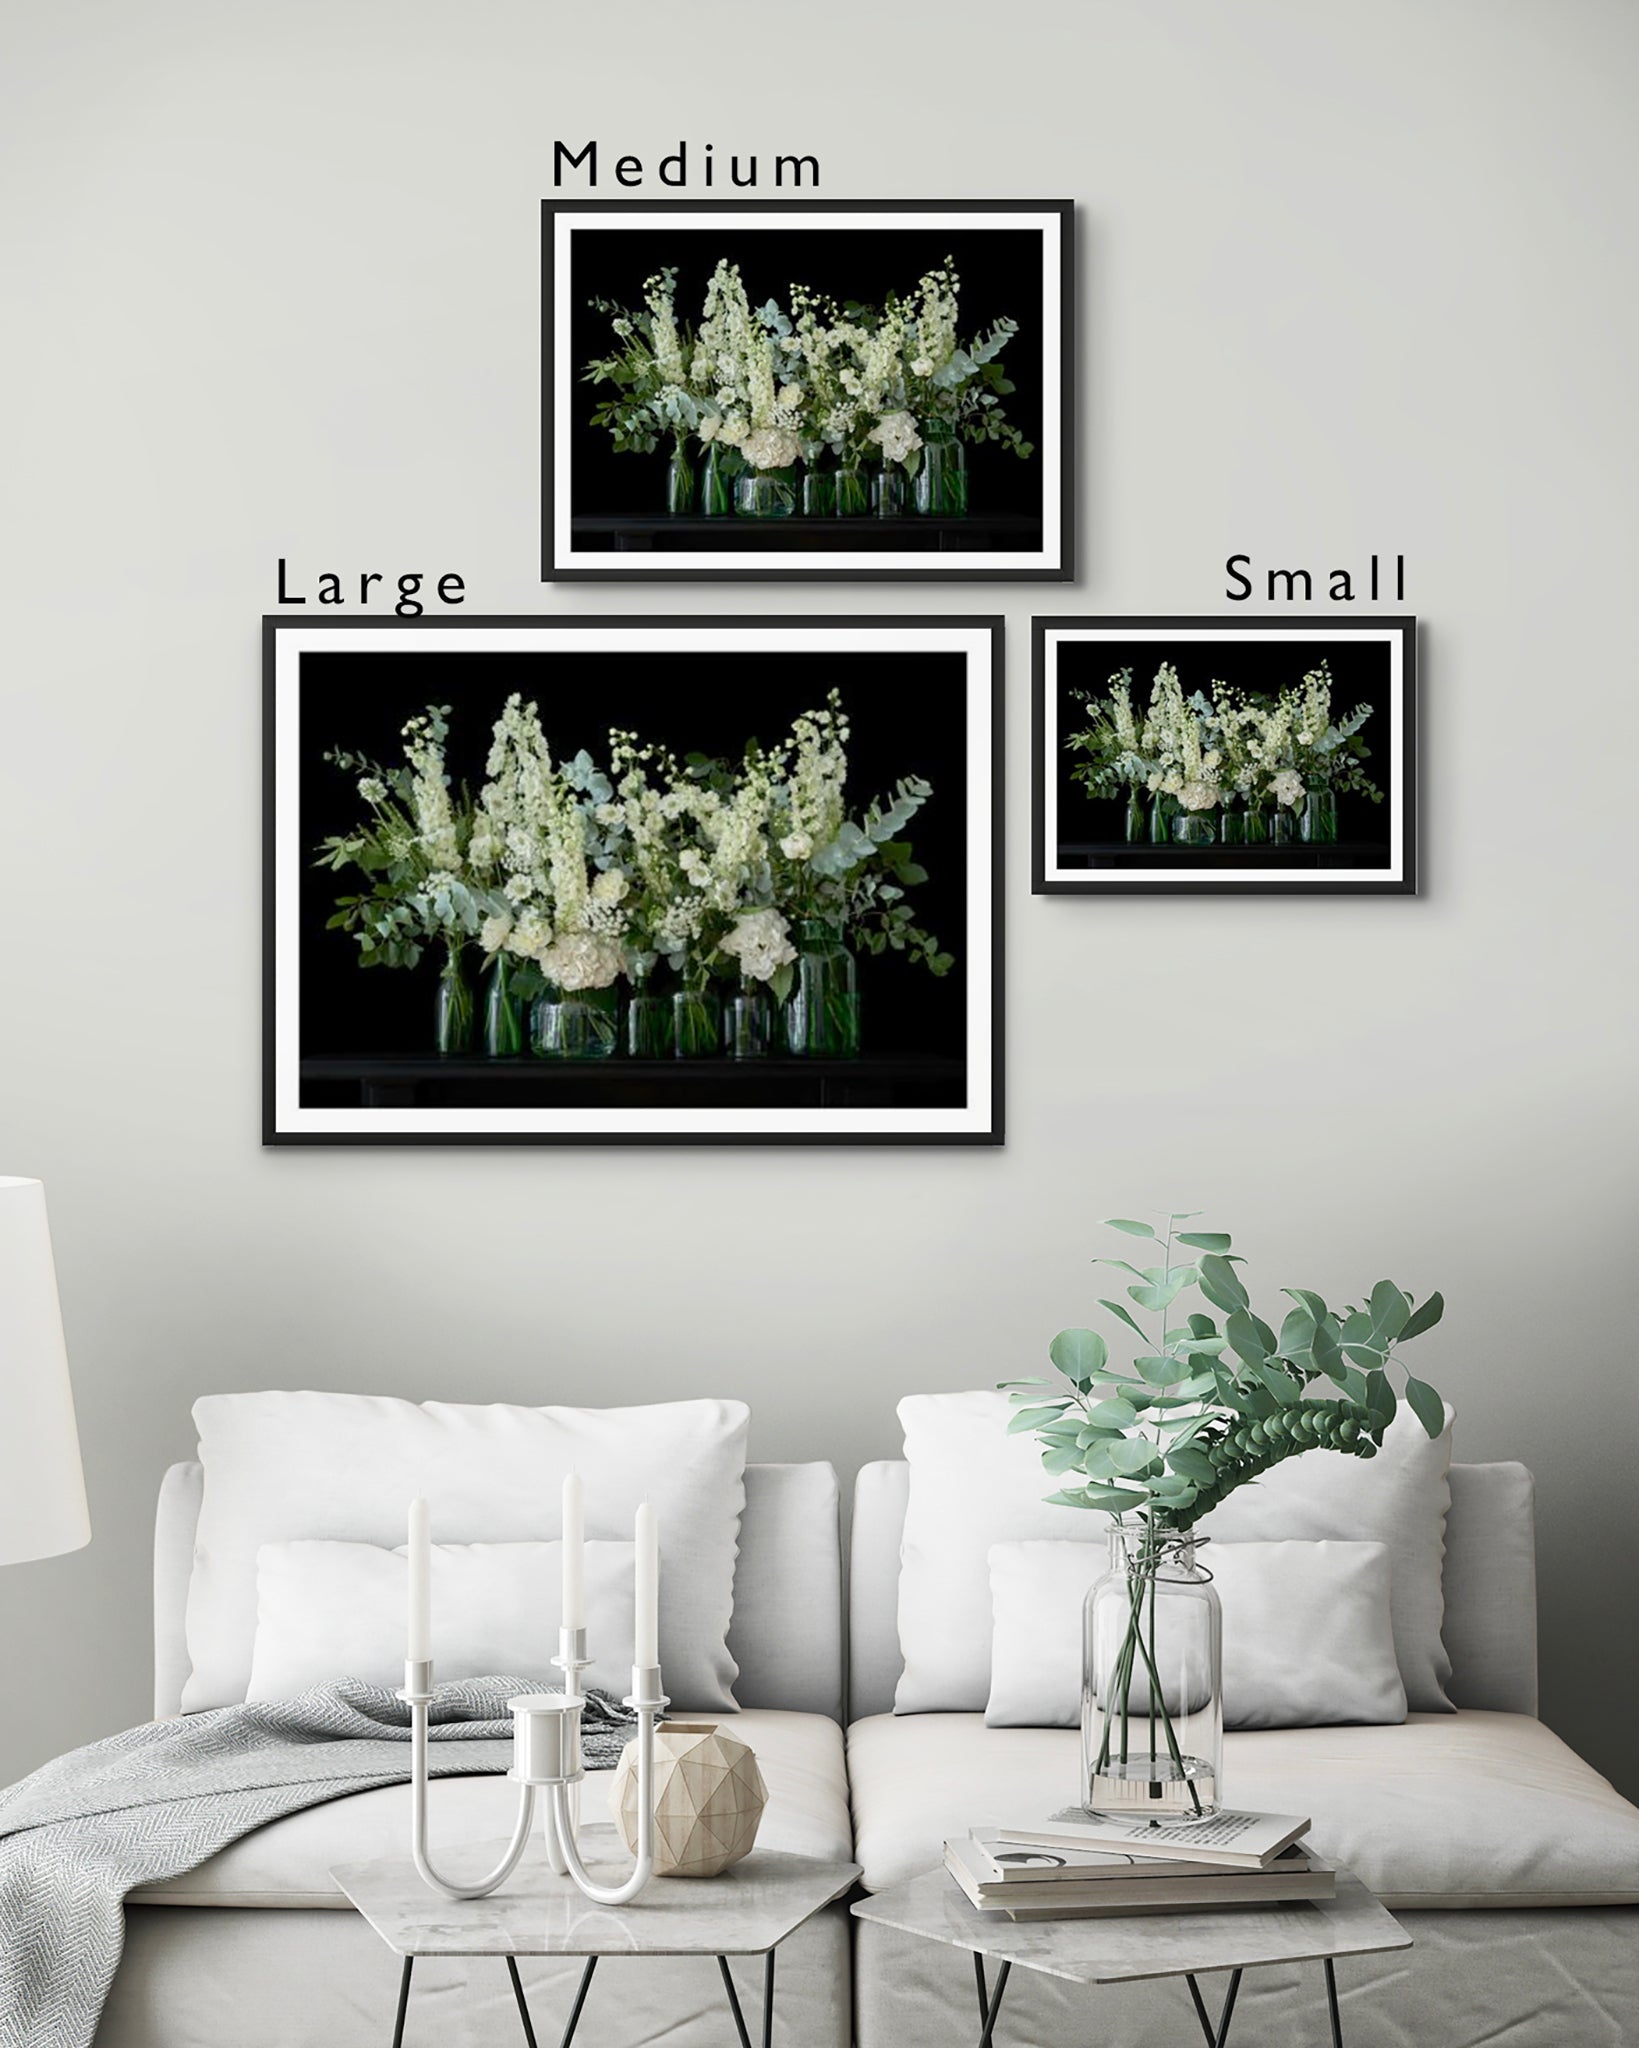 Limited Edition 'CECILY' Framed Photographic Prints Shown in 3 Sizes, Small, Medium & Large.